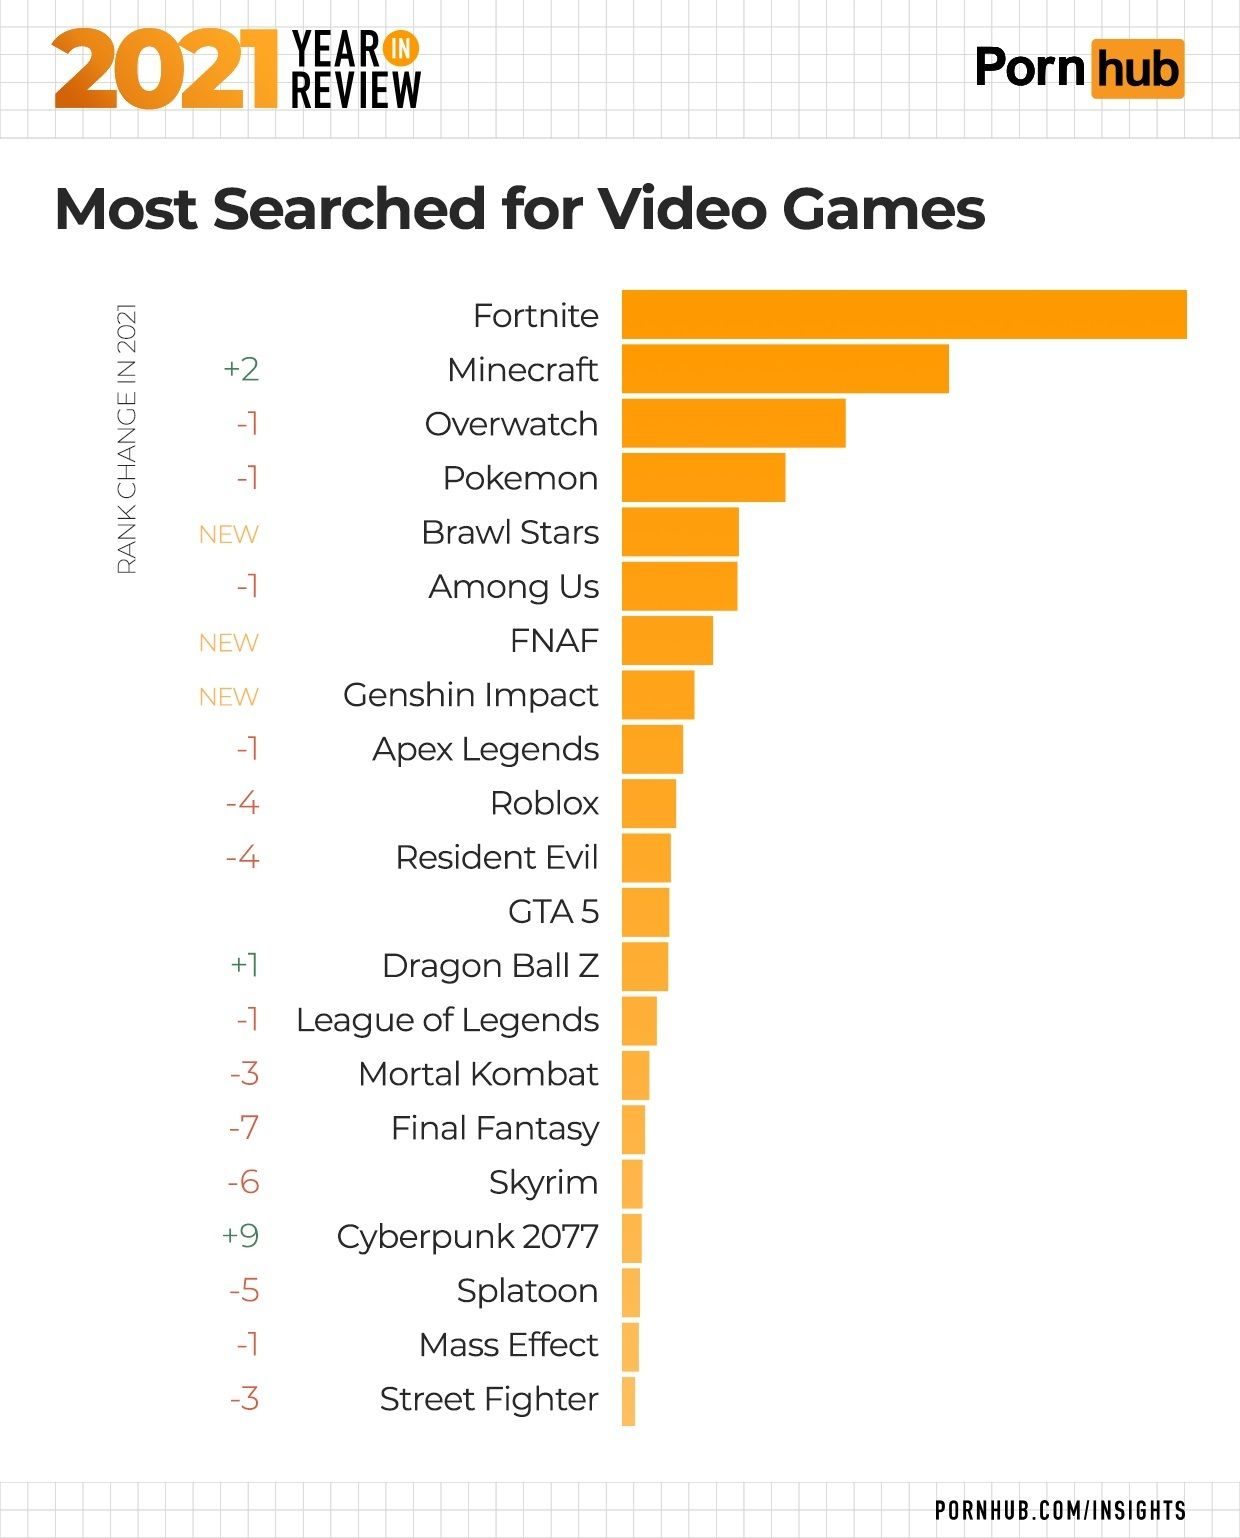 1-pornhub-insights-2021-year-in-review-most-searched-video-games-9531-4996545